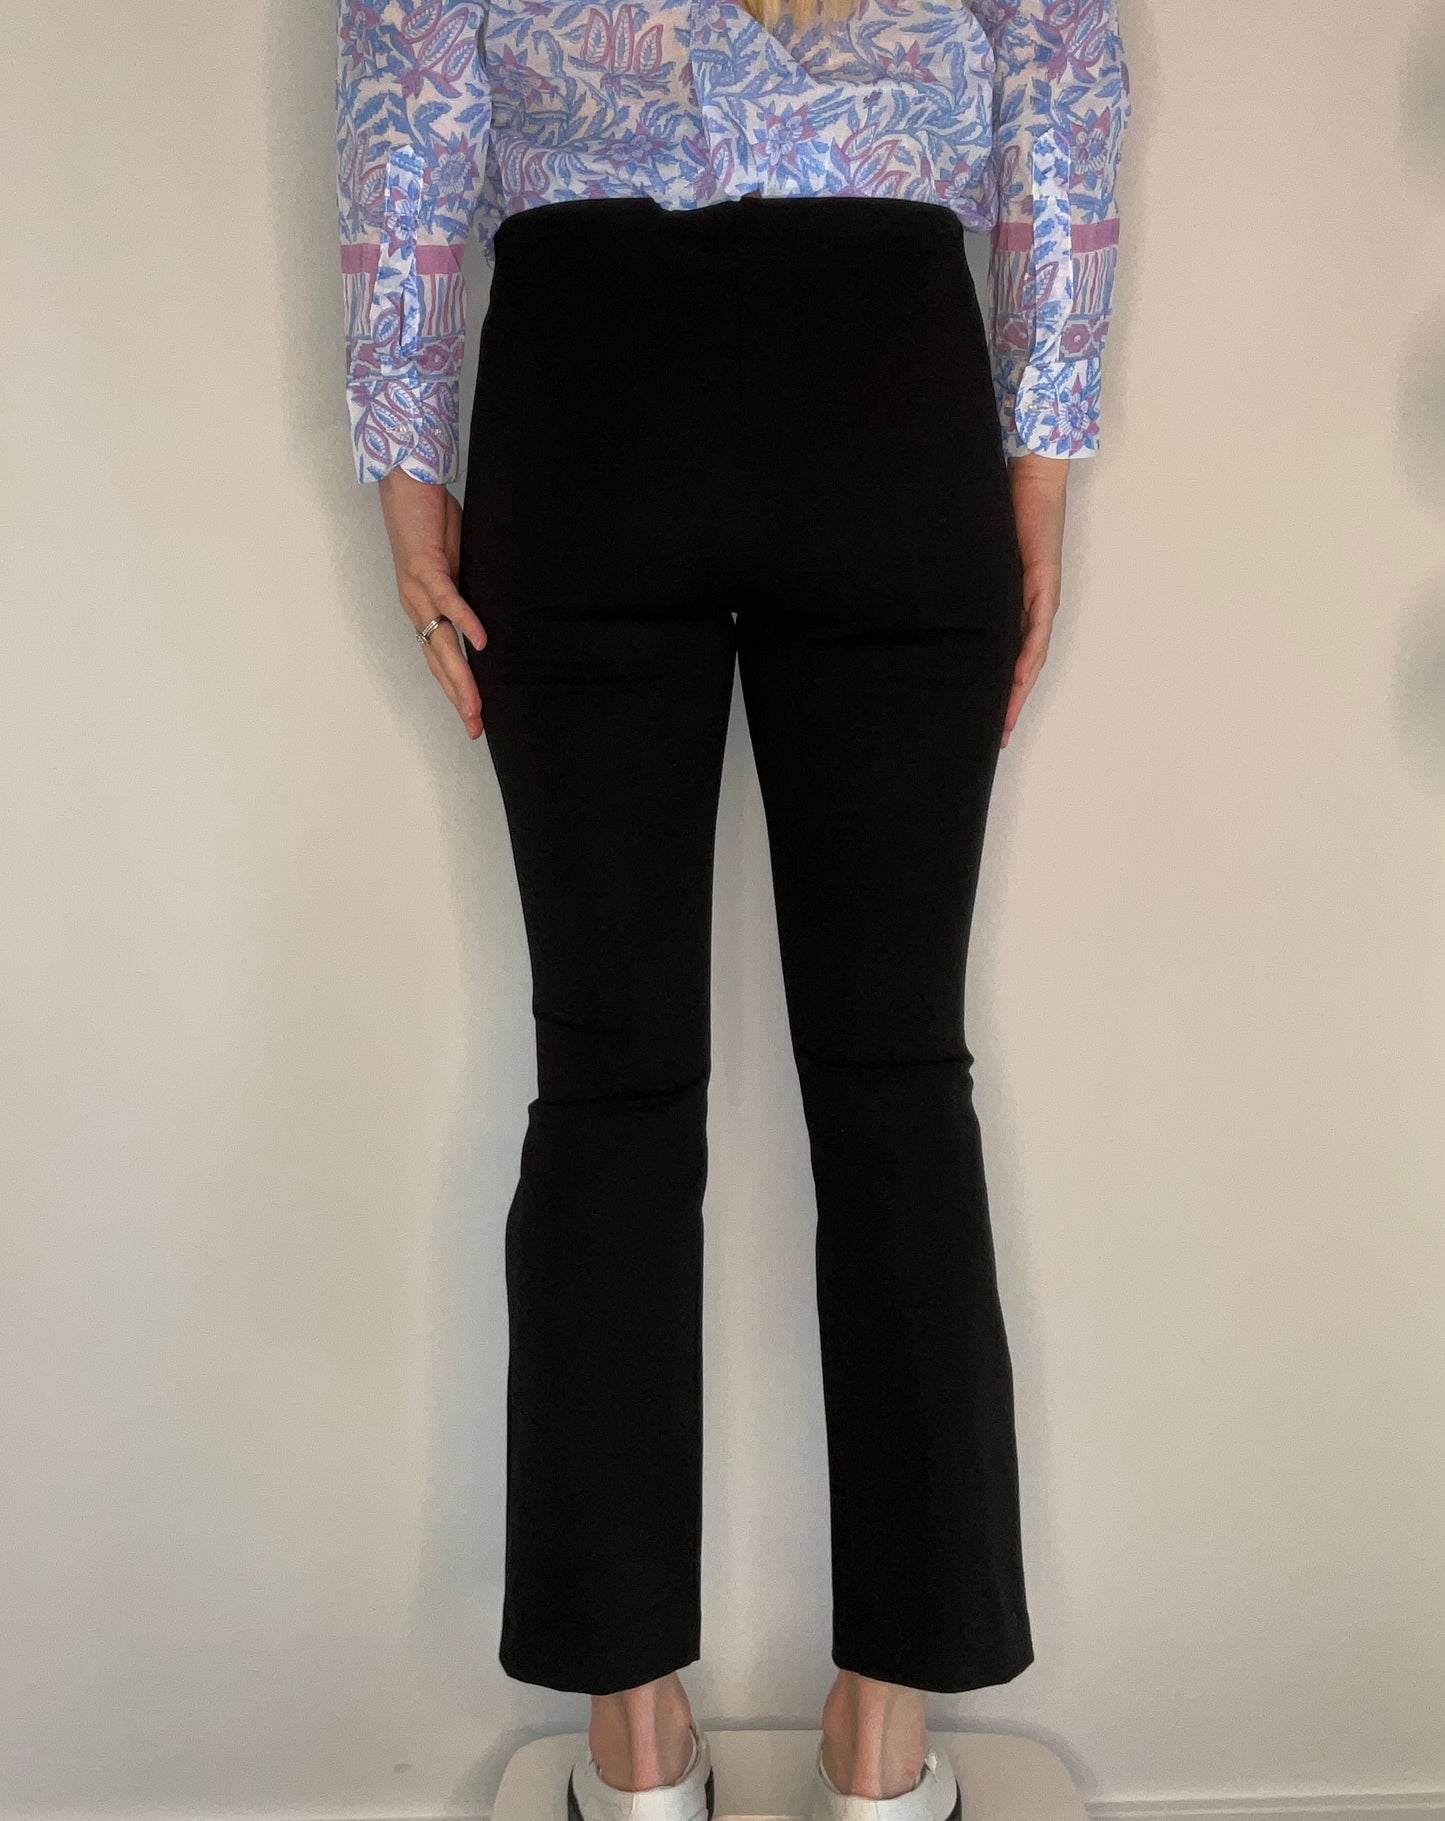 PULL ON BLACK BUTTON PANT